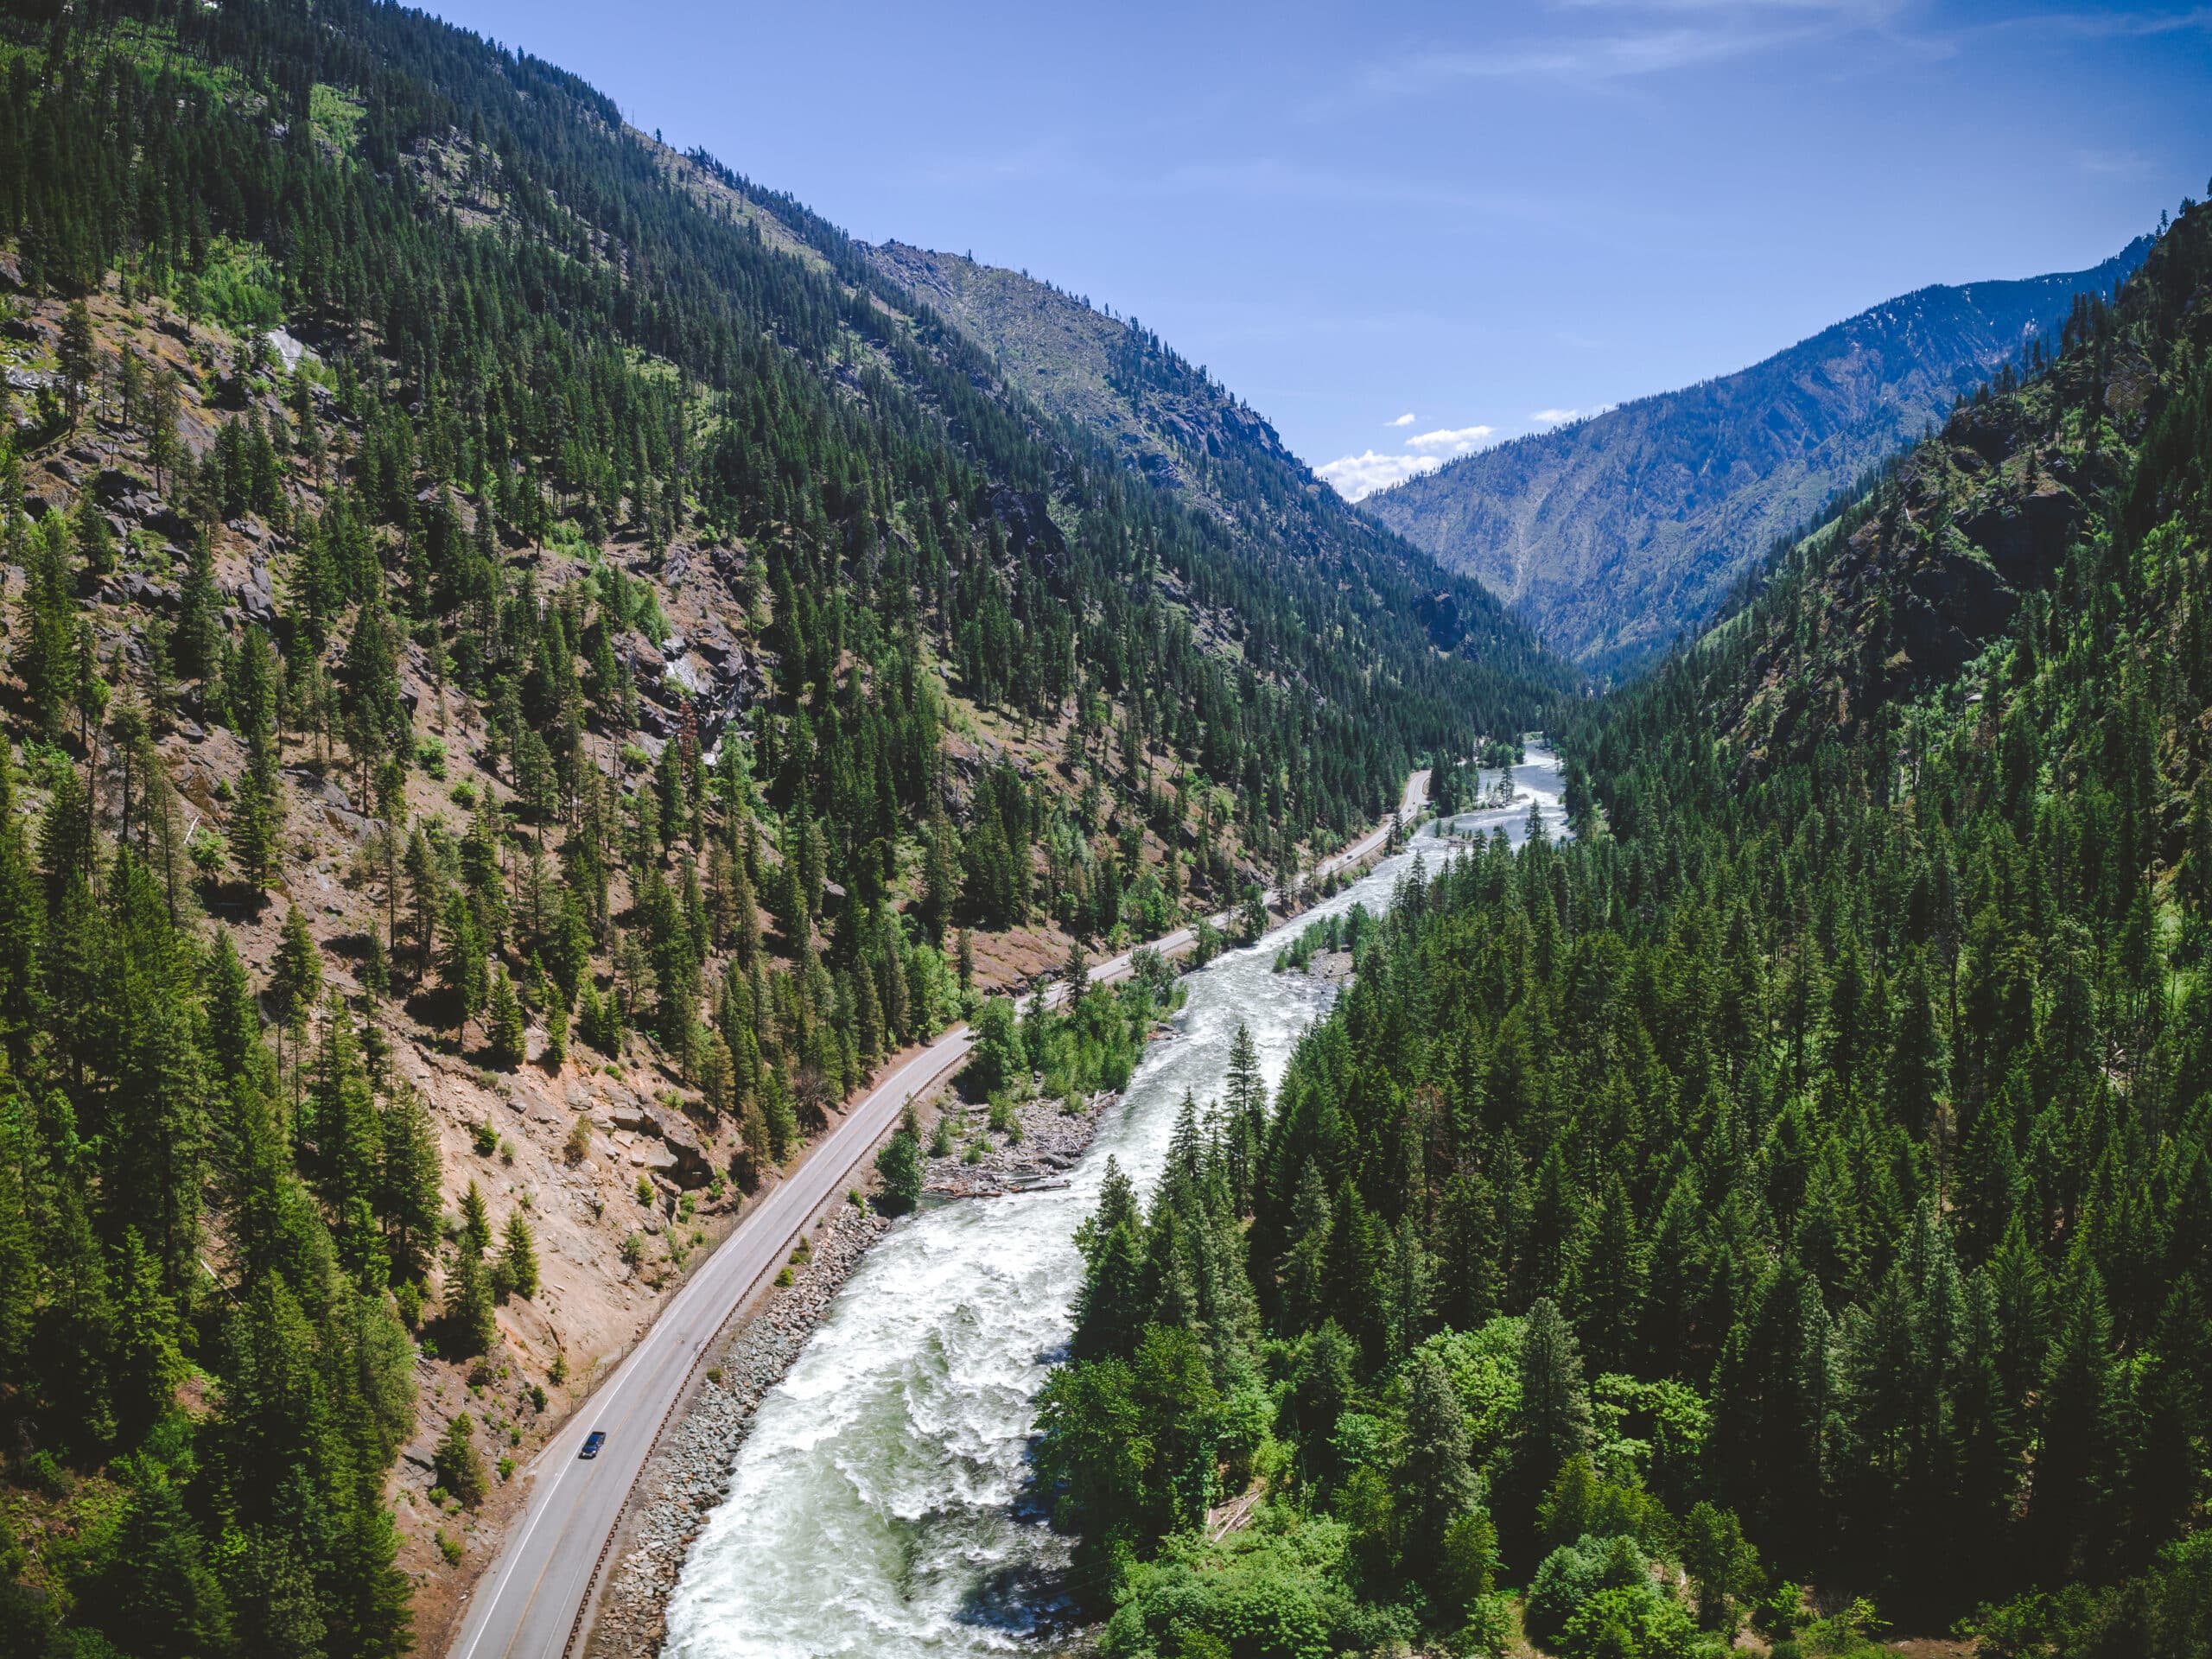 Flat profile style of Tumwater Canyon by Leavenworth, Washington scene by helicopter